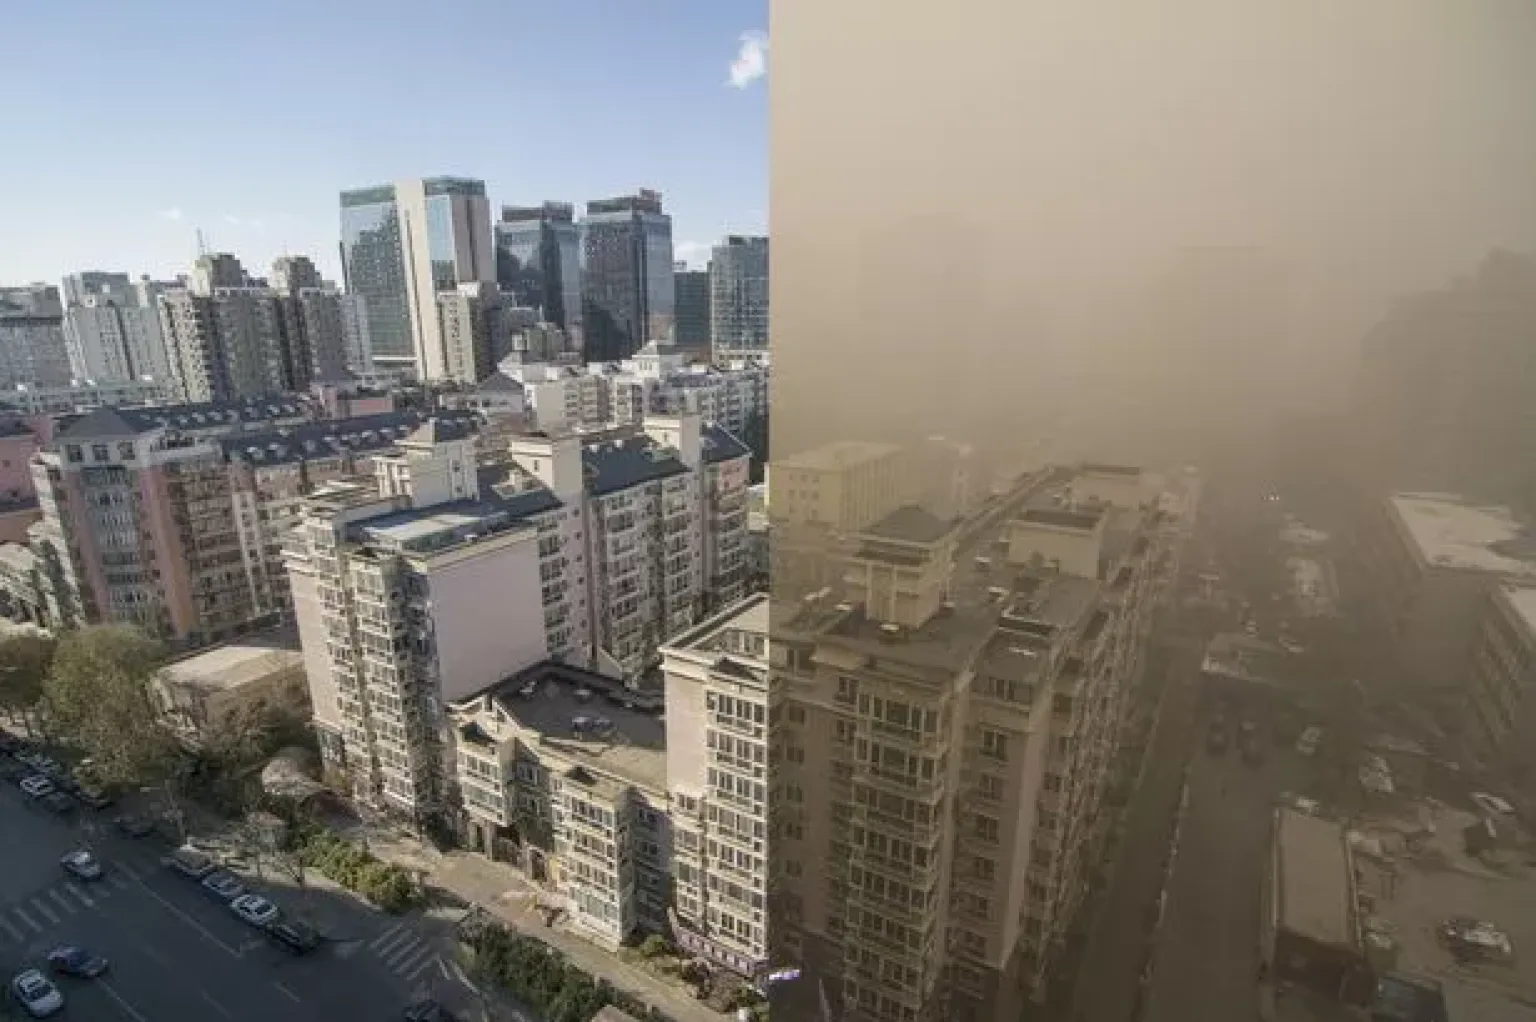 Beijing housing complex in clear blue sky and clean air vs. same Beijing housing complex in heavy pollution obscuring all buildings in brown smog